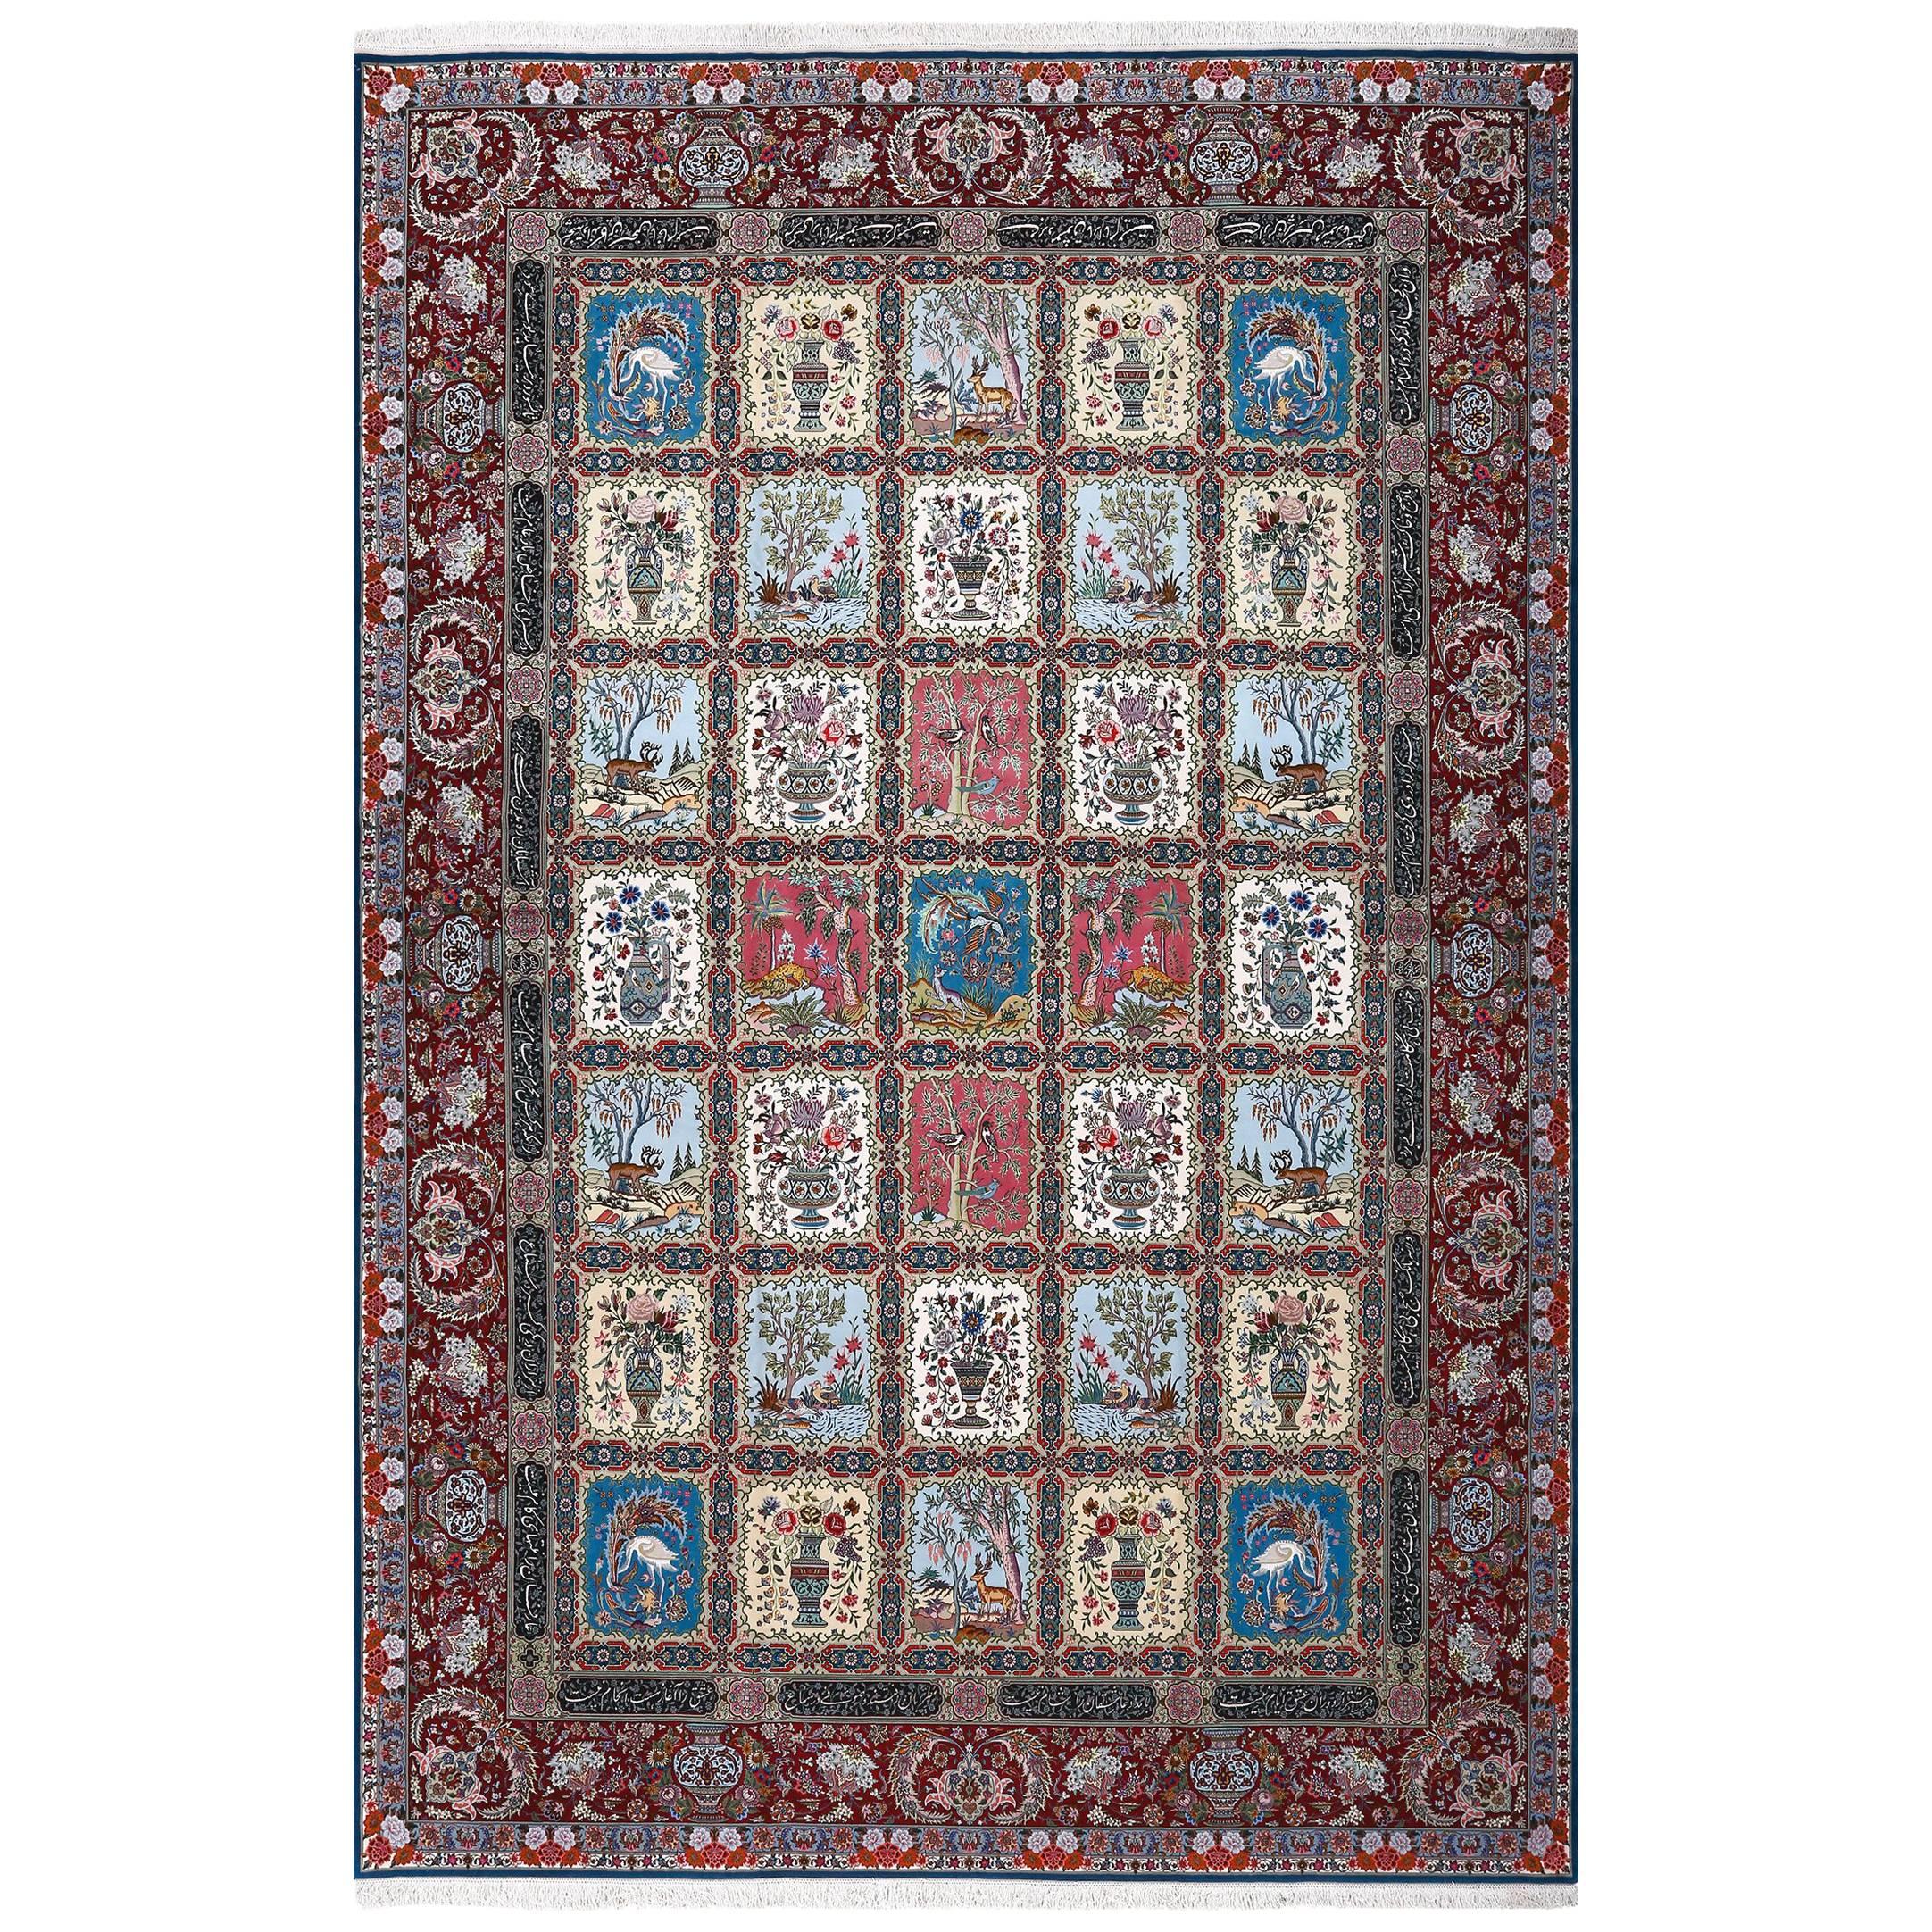 Nazmiyal Collection Vintage Tabriz Persian Rug. Size: 10 ft 7 in x 15 ft 11 in